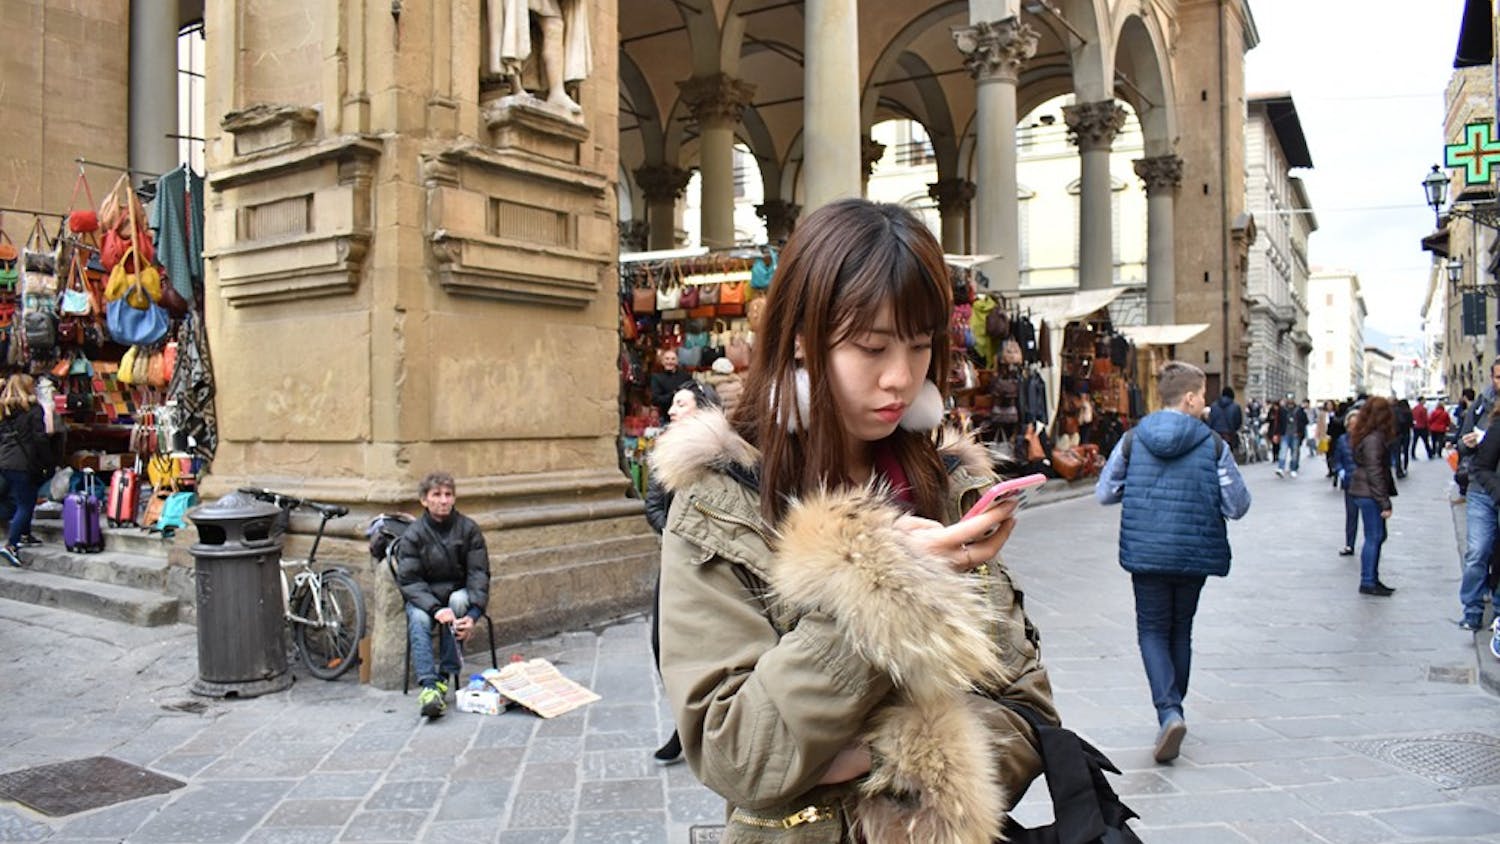 While wandering through Florence, tourists are often caught up in capturing moments rather than experiencing them. 
